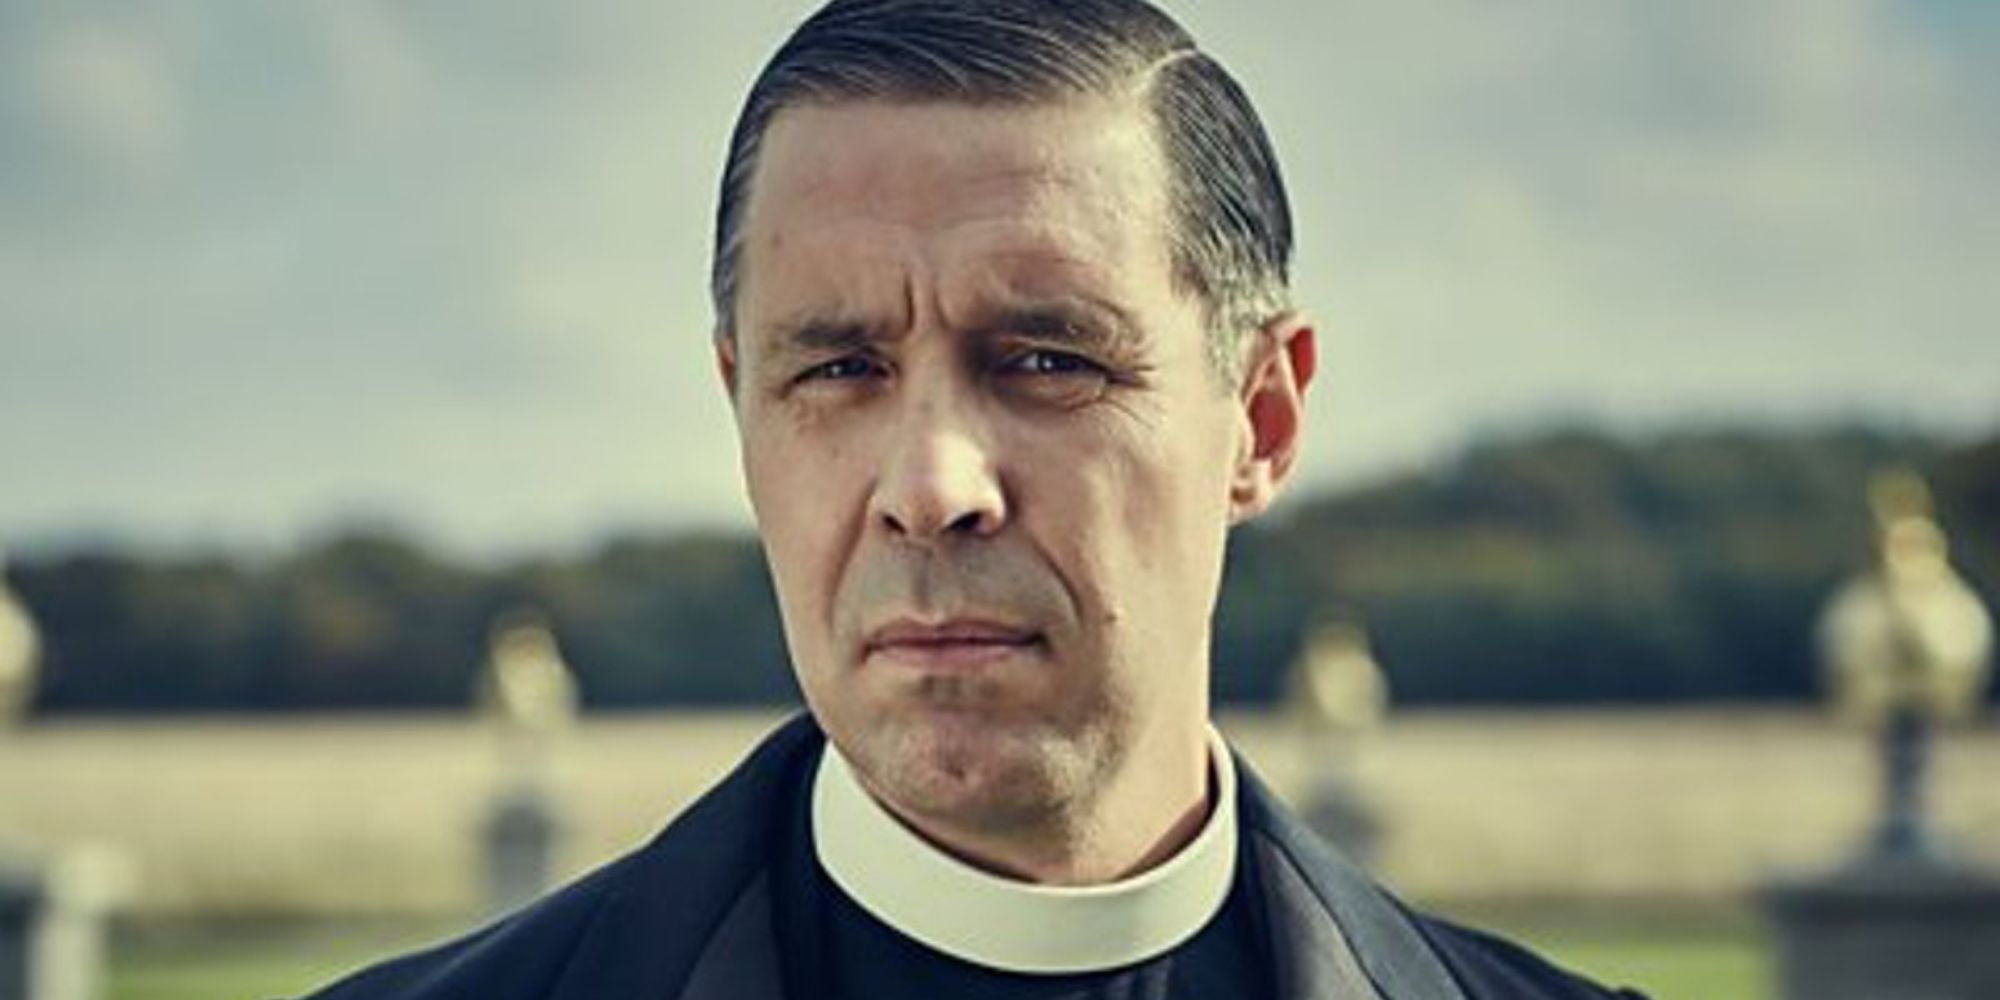 An image of Father Hughes from TV show Peaky Blinders.